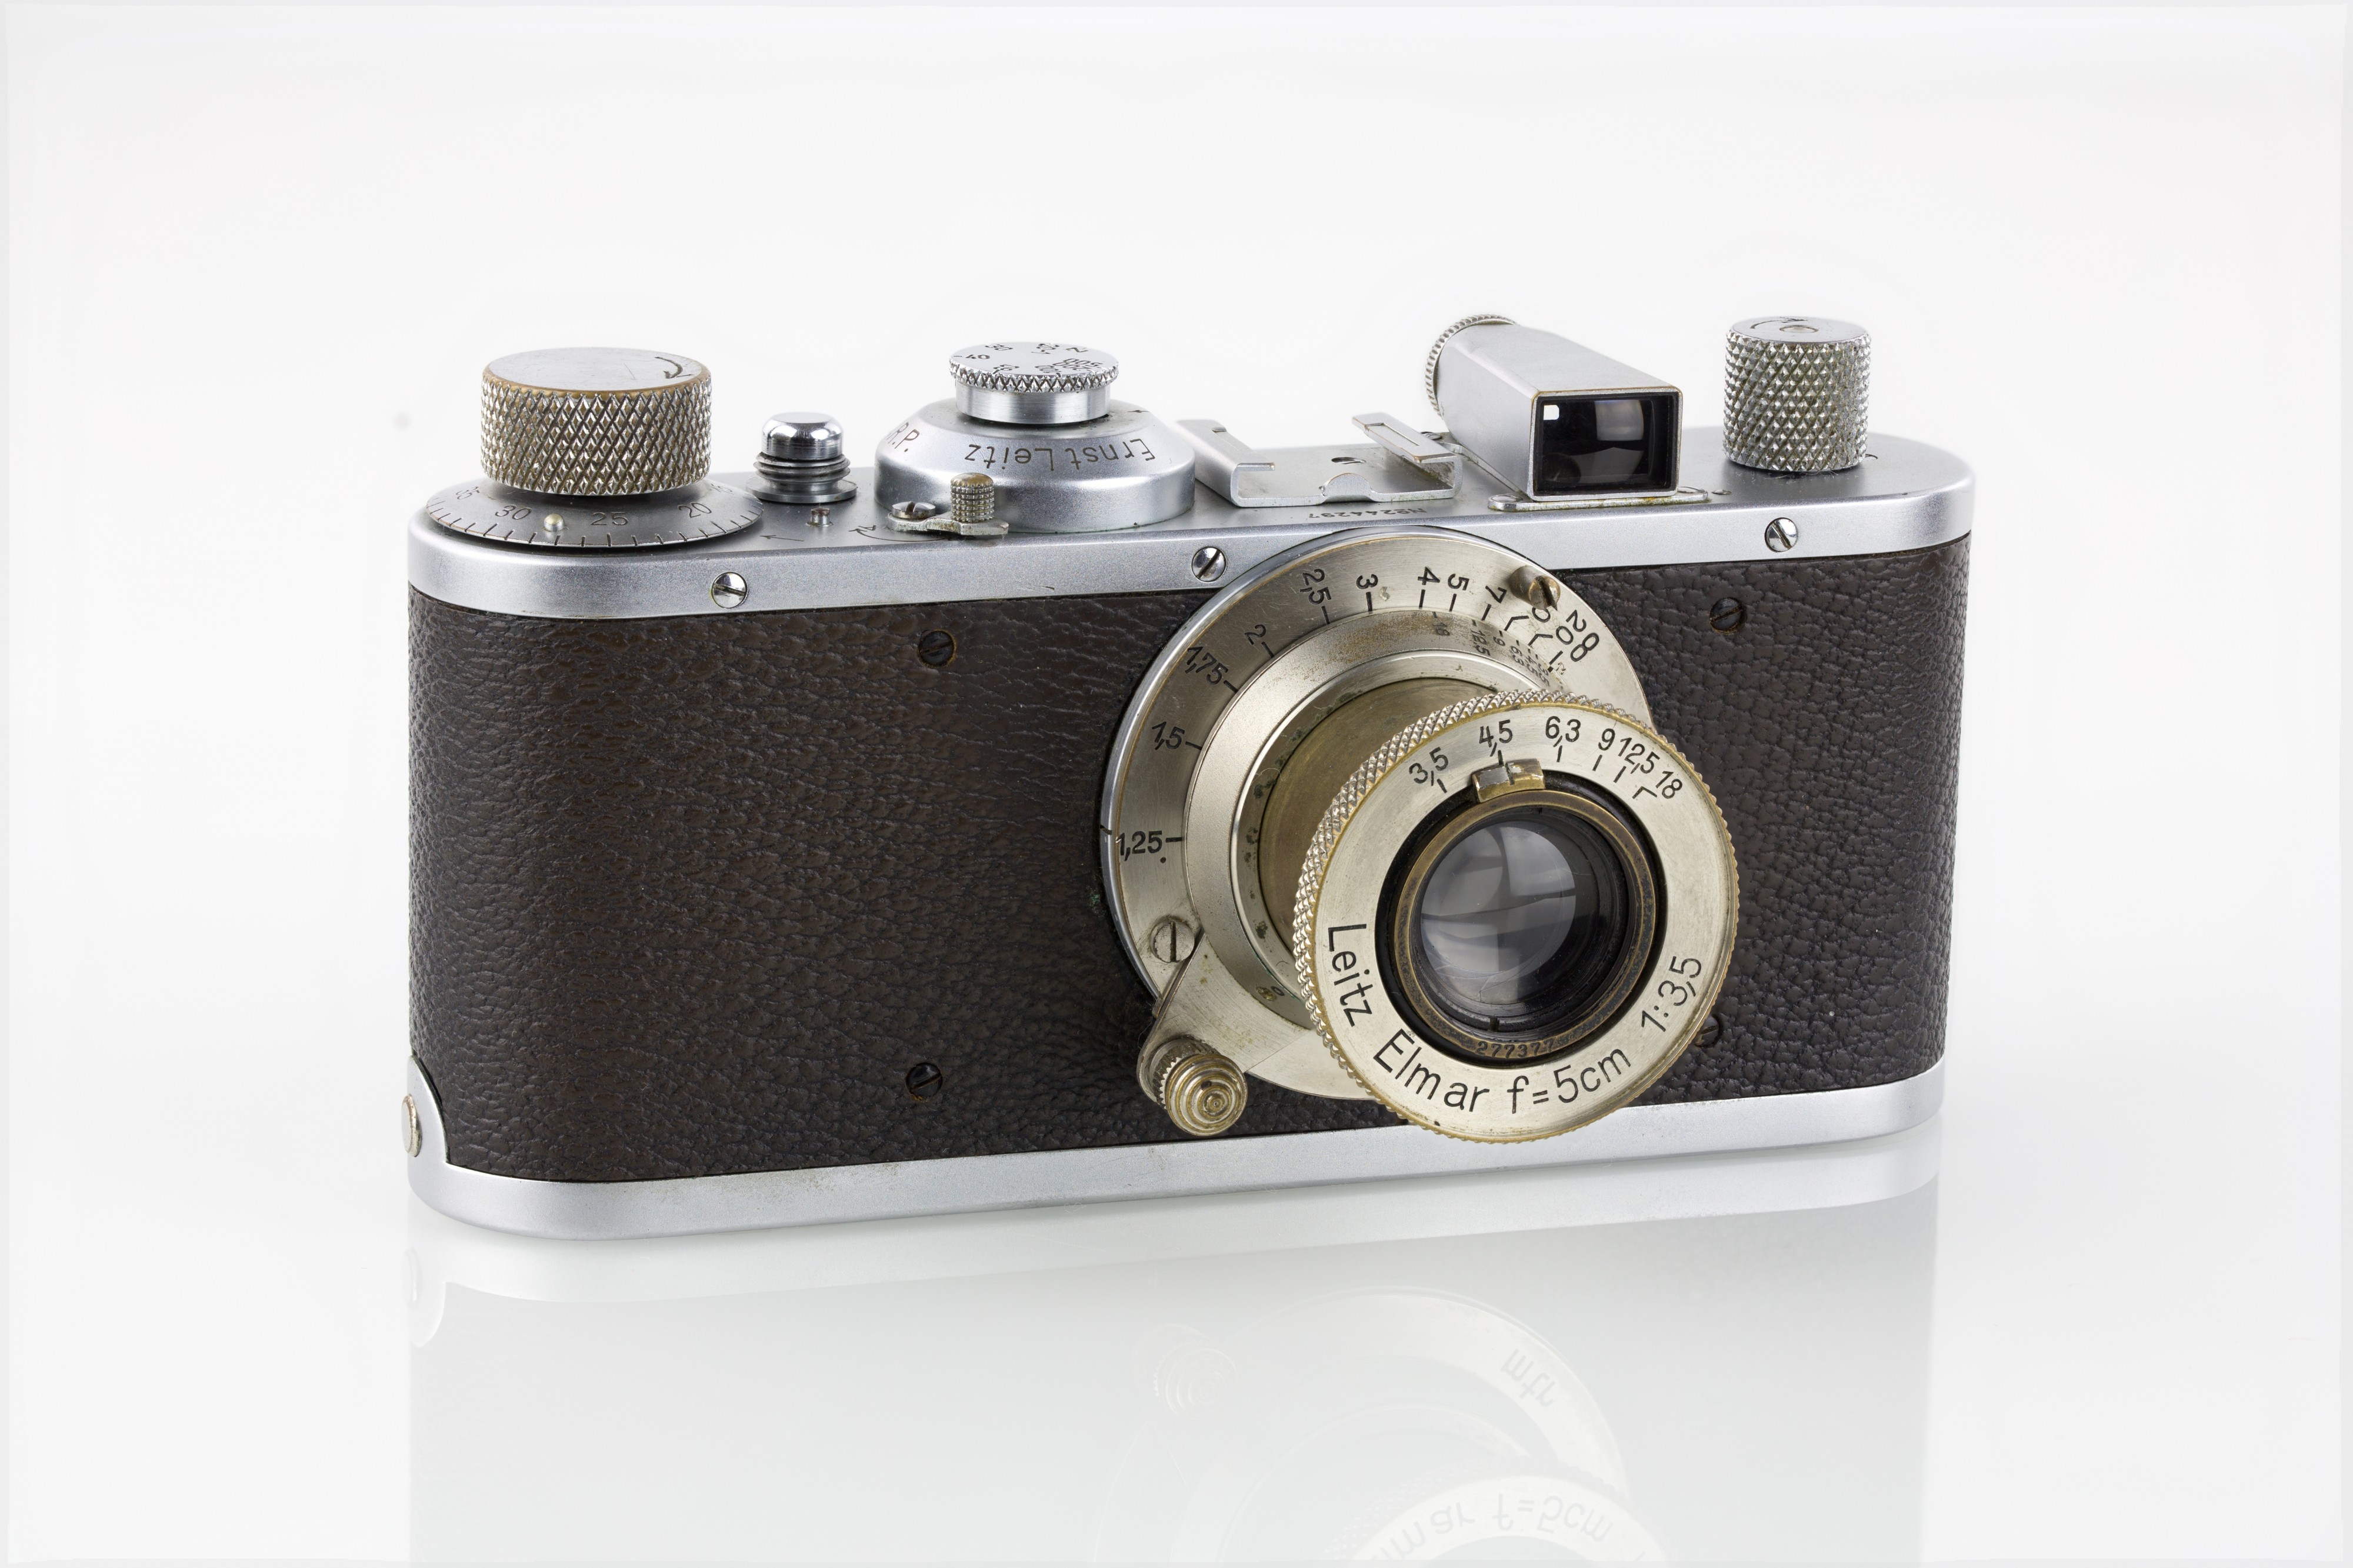 LEI0190 188 Leica Standard Chrom Sn. 244297 1937 -38-M39 Front view-5809 hf